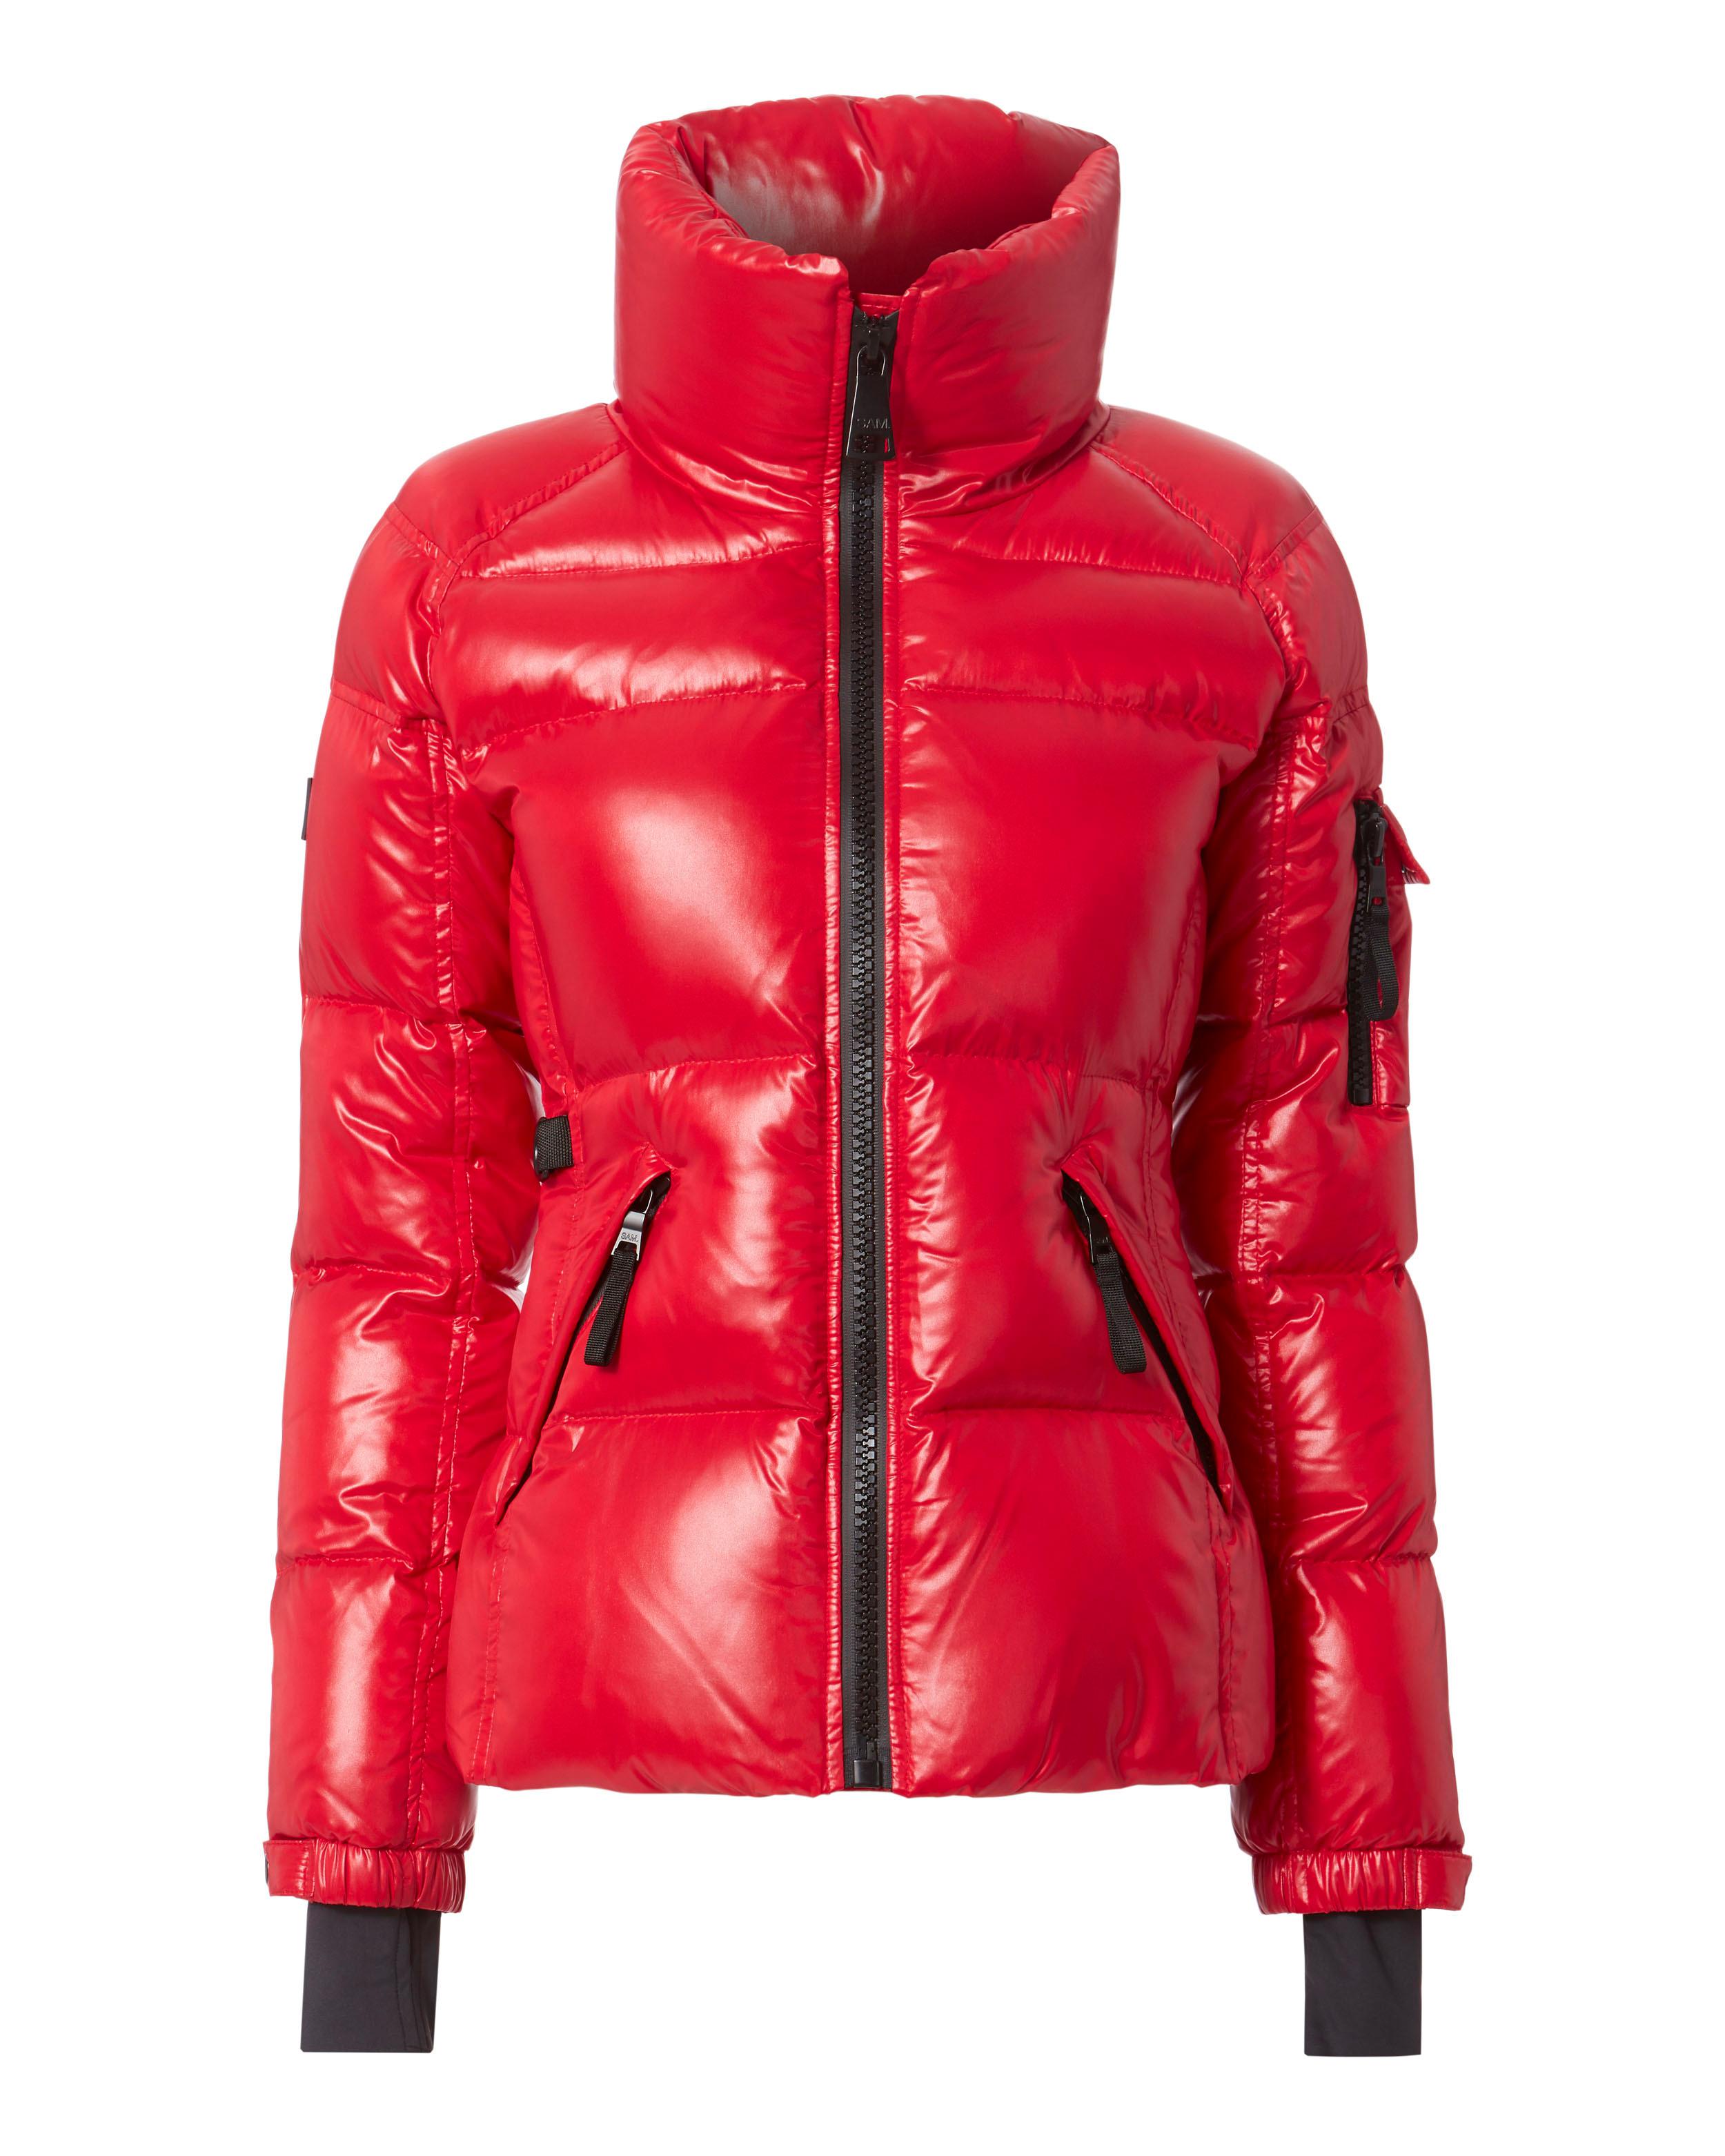 Lyst - Sam. Candy Red Freestyle Puffer Jacket in Red